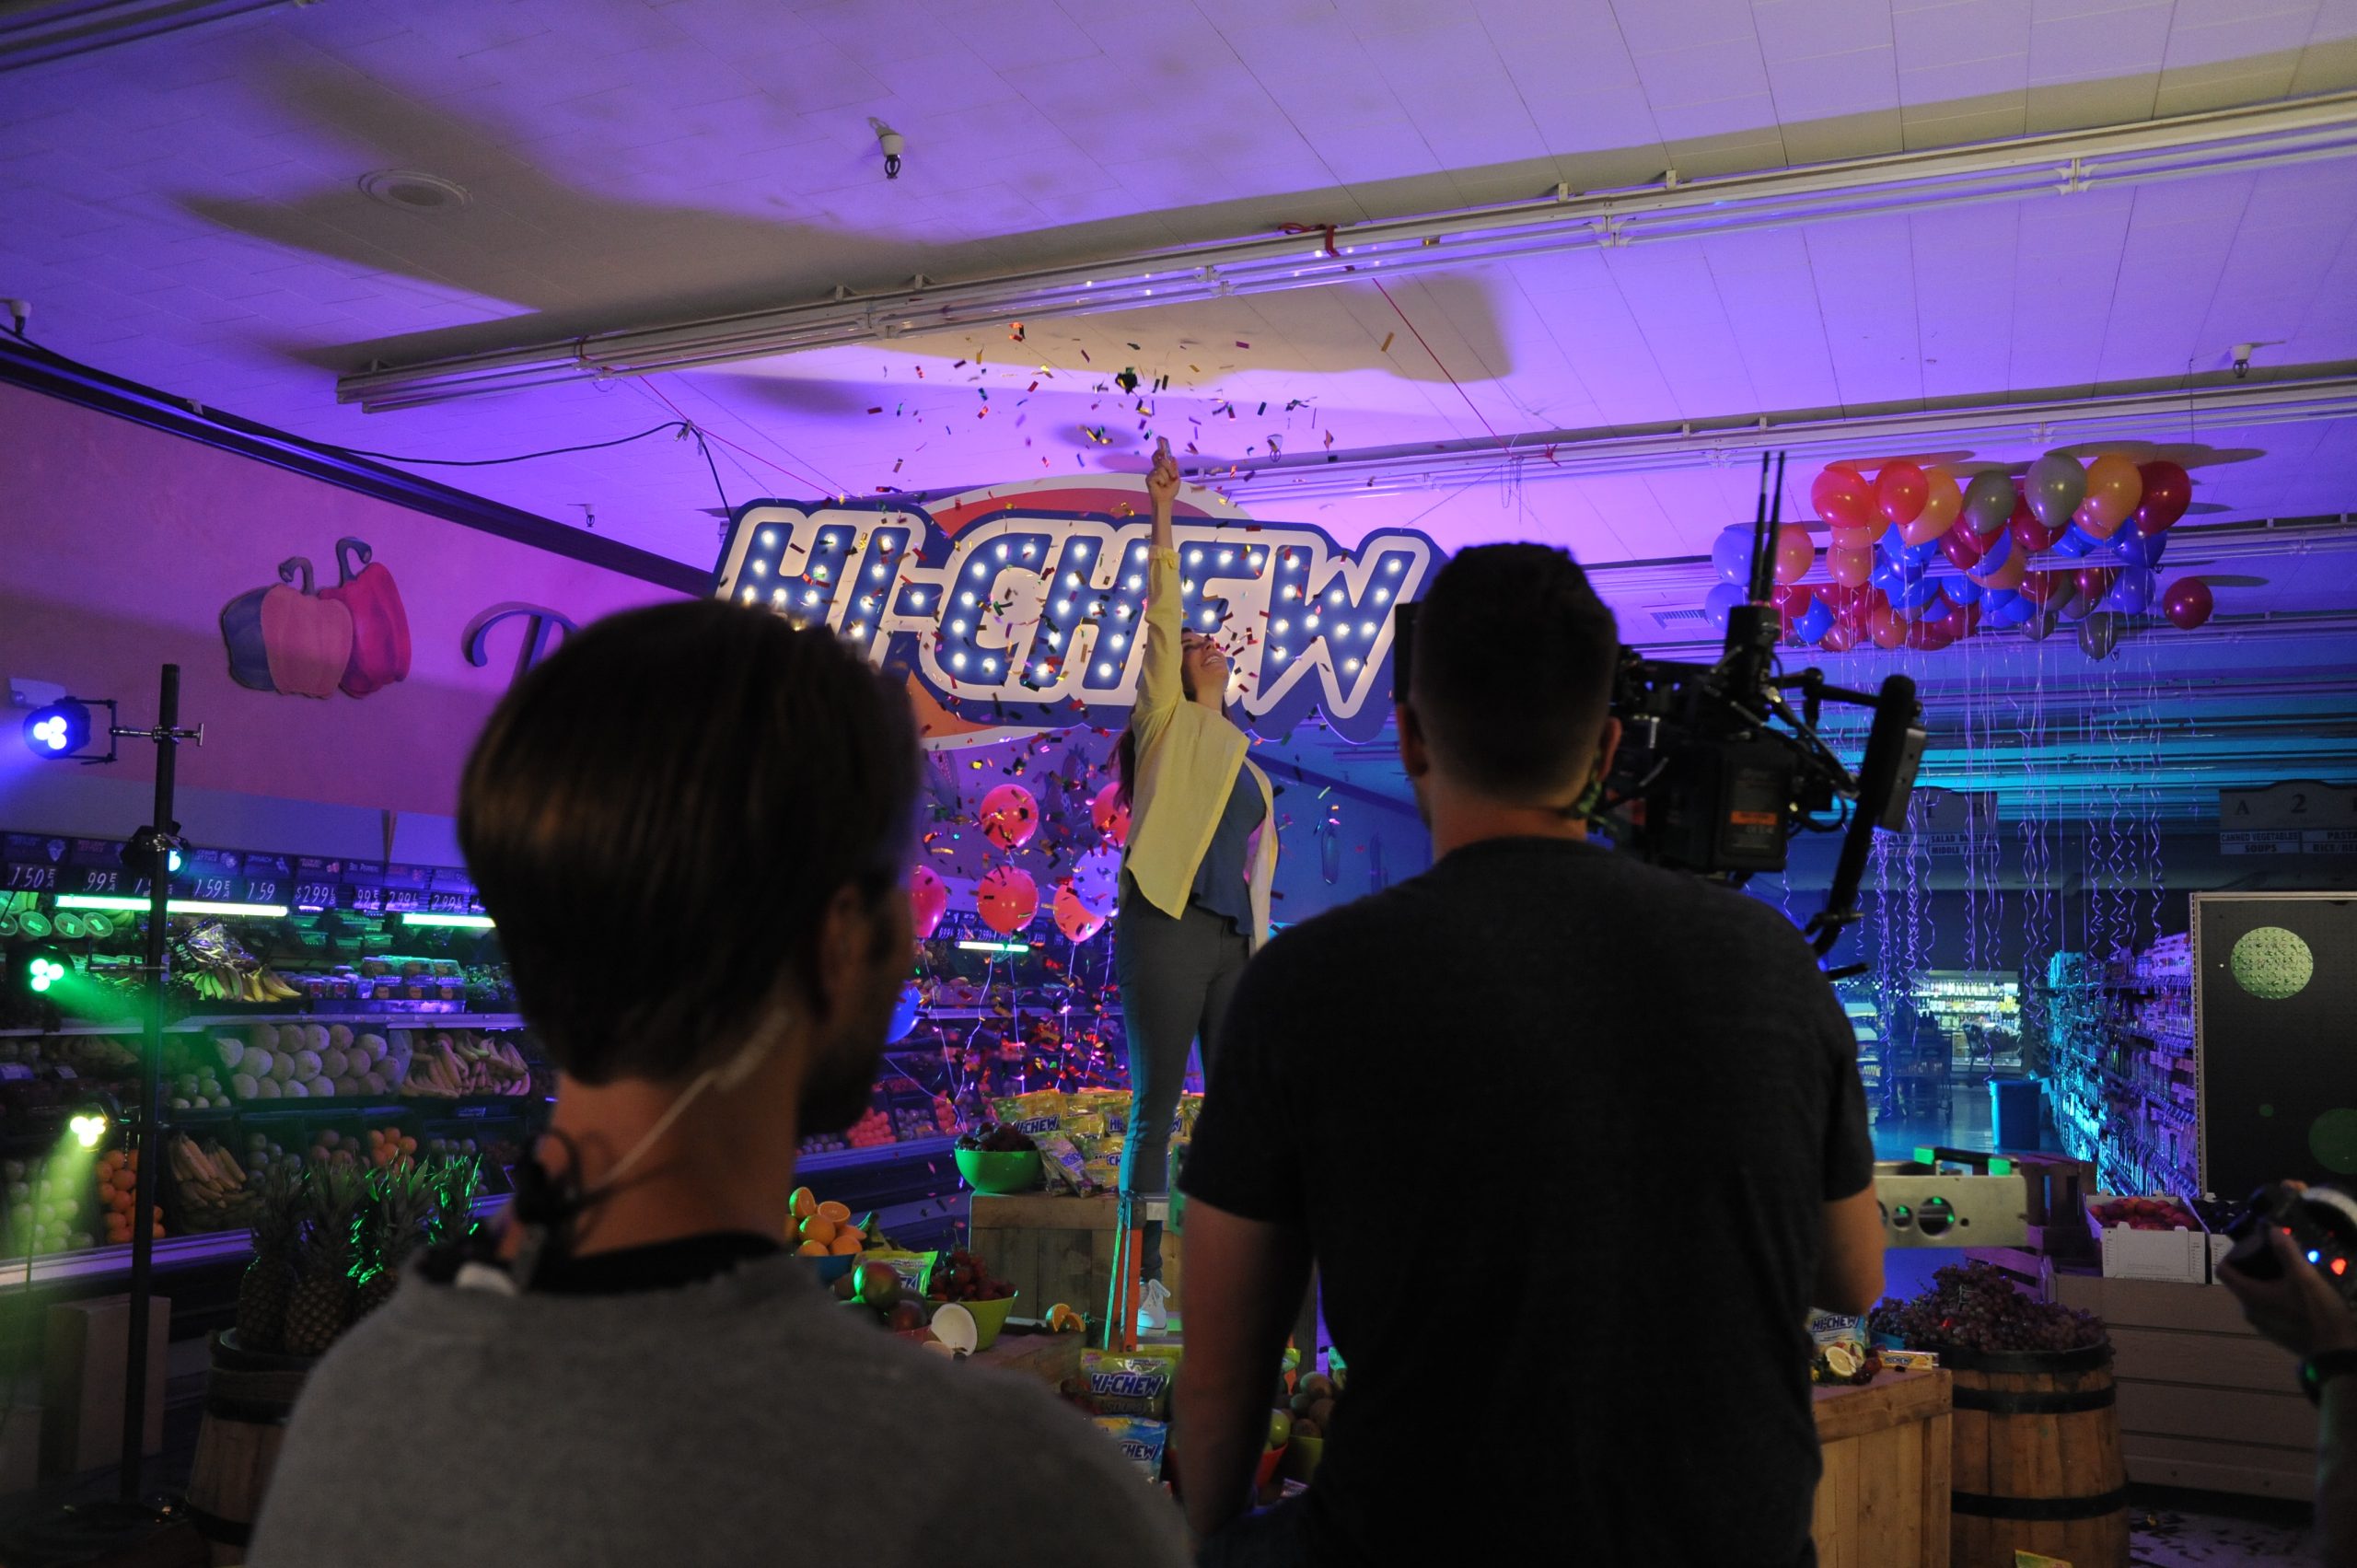 Behind the scenes of the HI-CHEW commercial